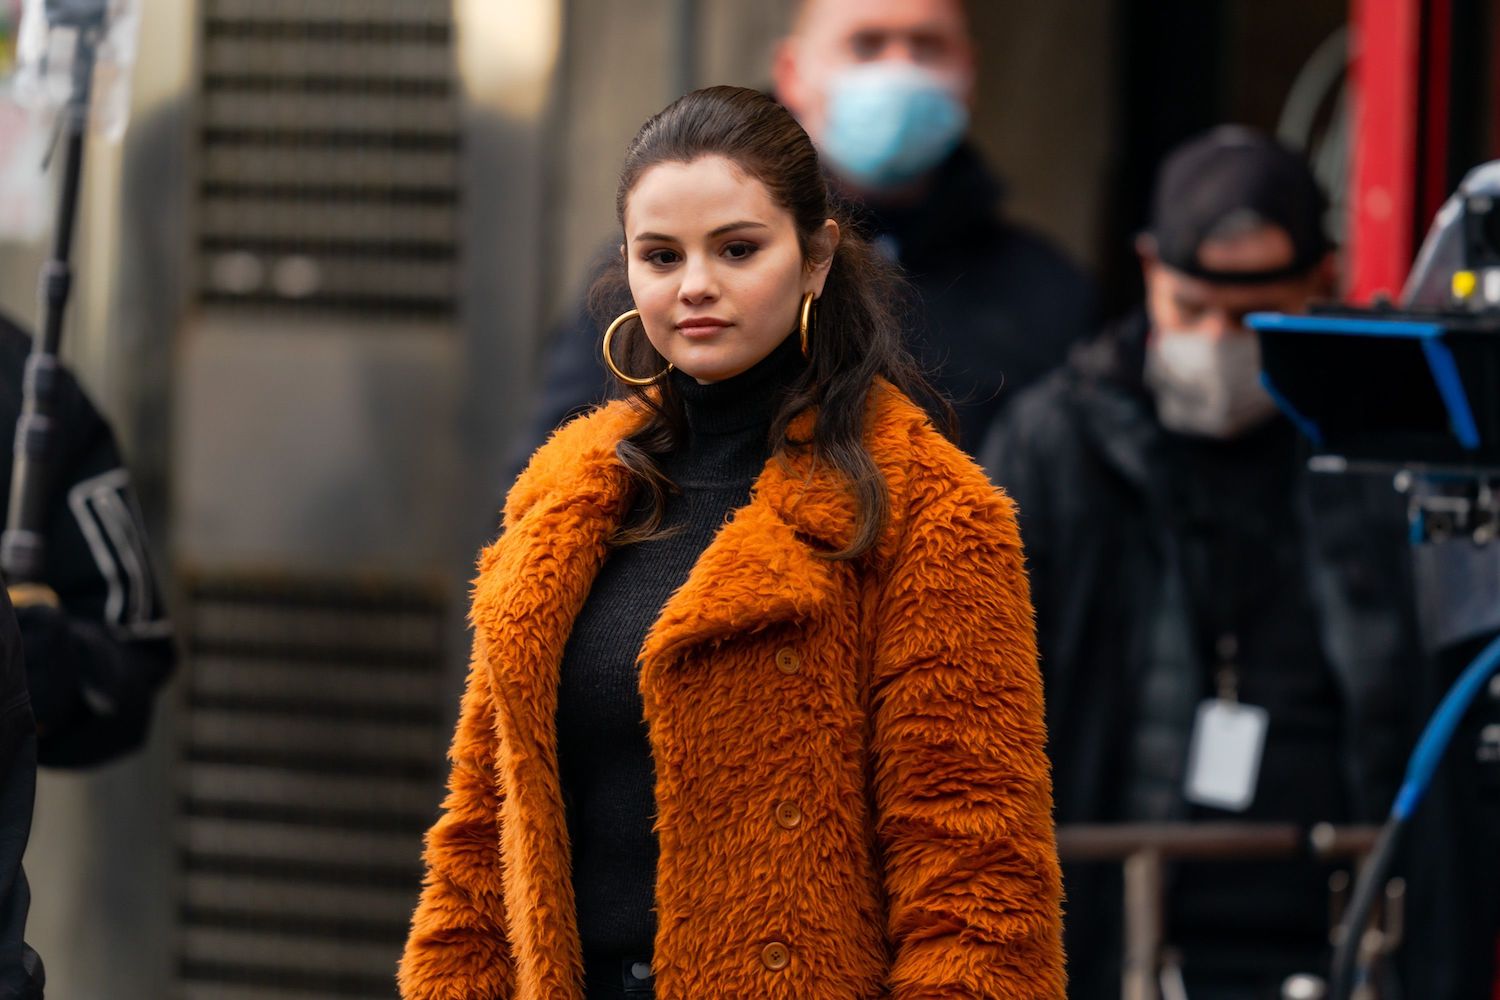 Selena Gomez on set for Only Murders in the Building in Rockaway Beach on February 23, 2021